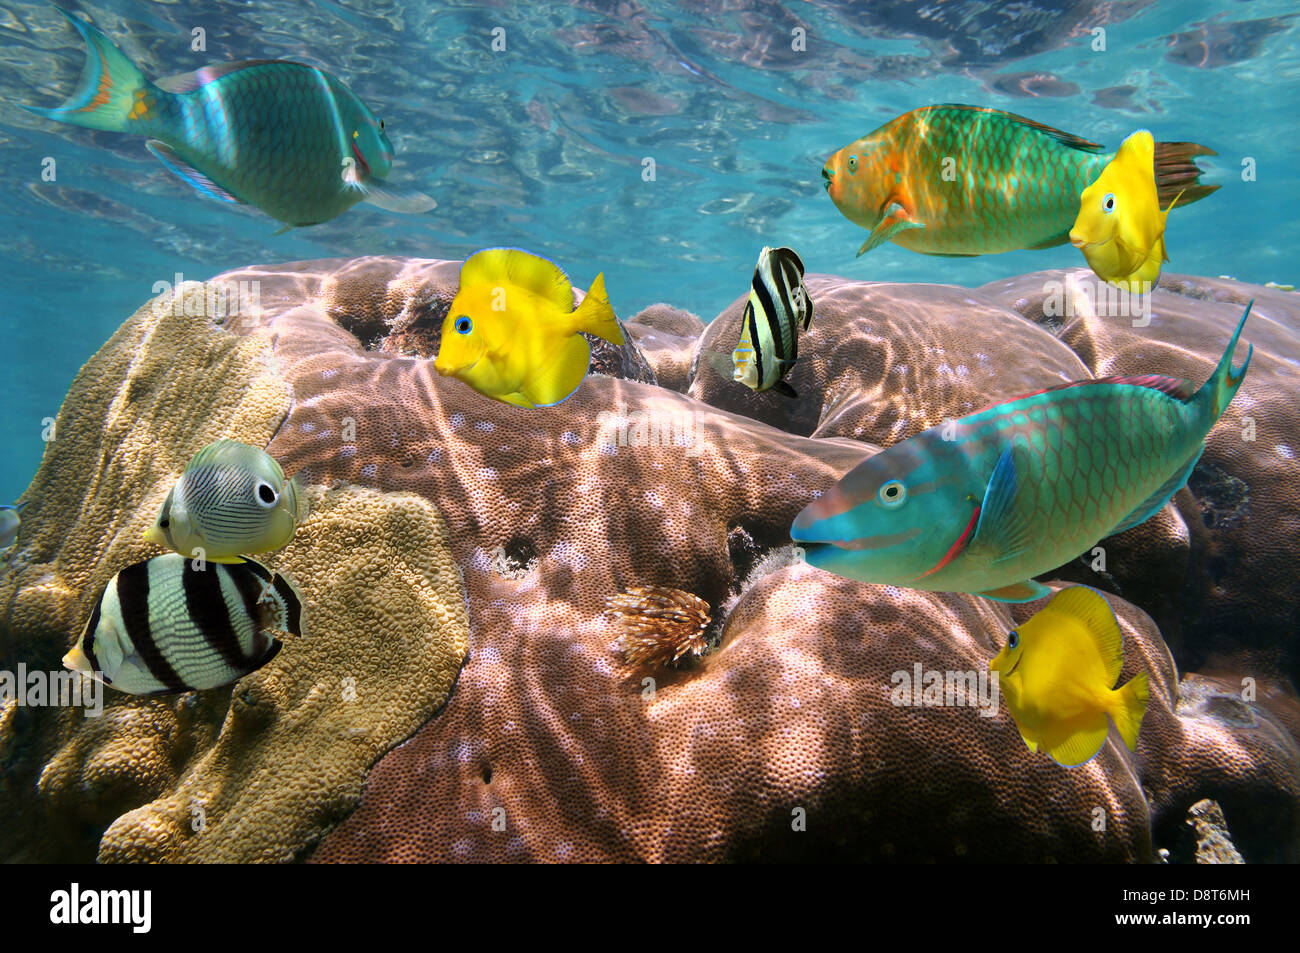 Colorful tropical fish and coral with water surface in background Stock Photo